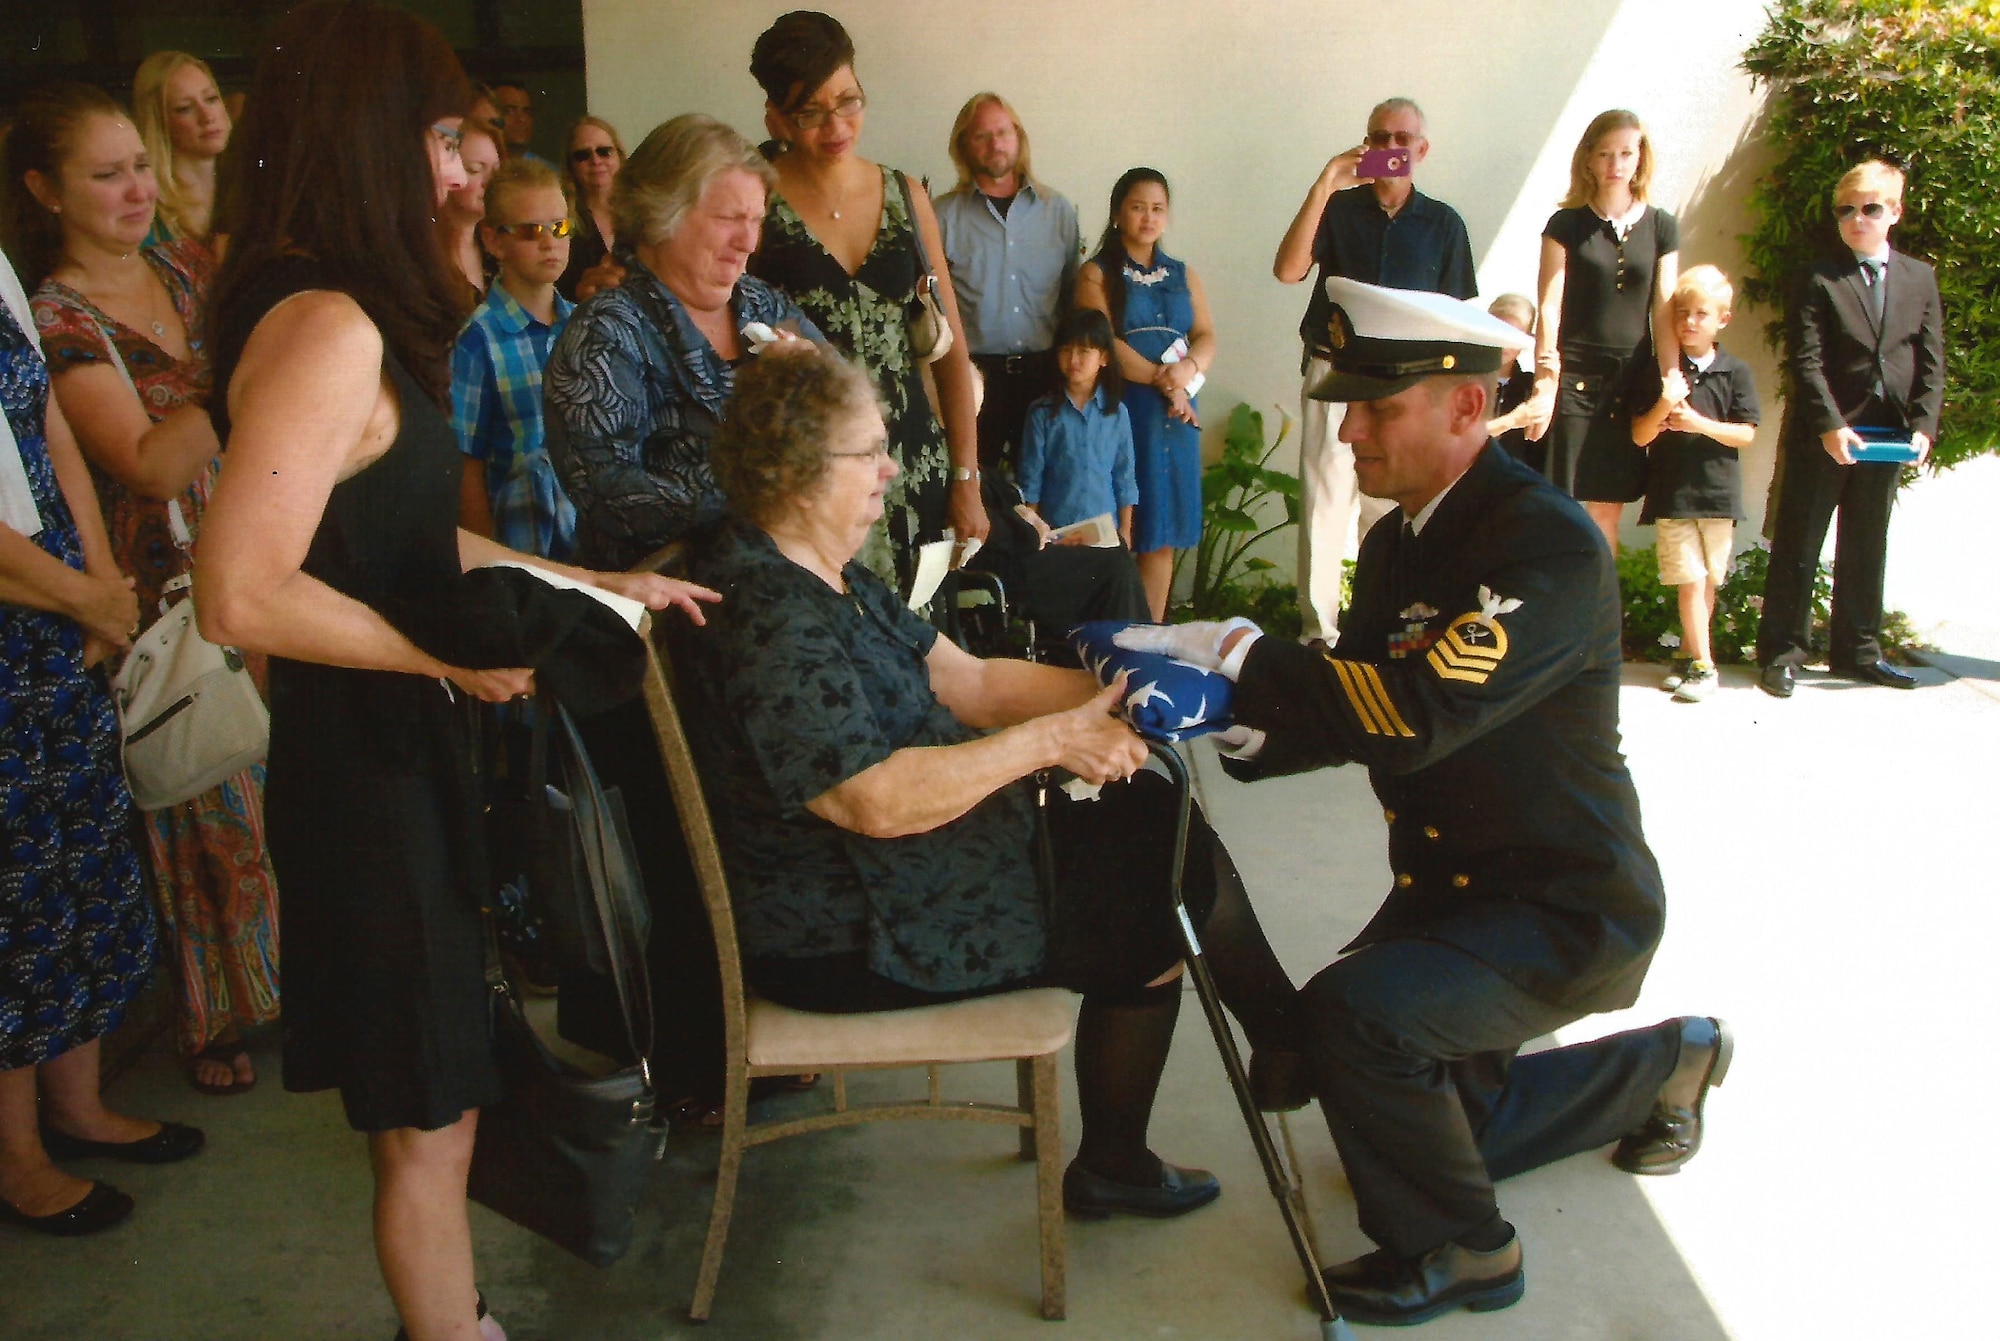 Intelligence Specialist Chief Petty Officer Paul Baumgartner hands a folded flag to his grandmother, Betty Lou Baumgartner, after acting as pallbearer alongside his five brothers at their grandfather Roy's funeral in June, 2017.